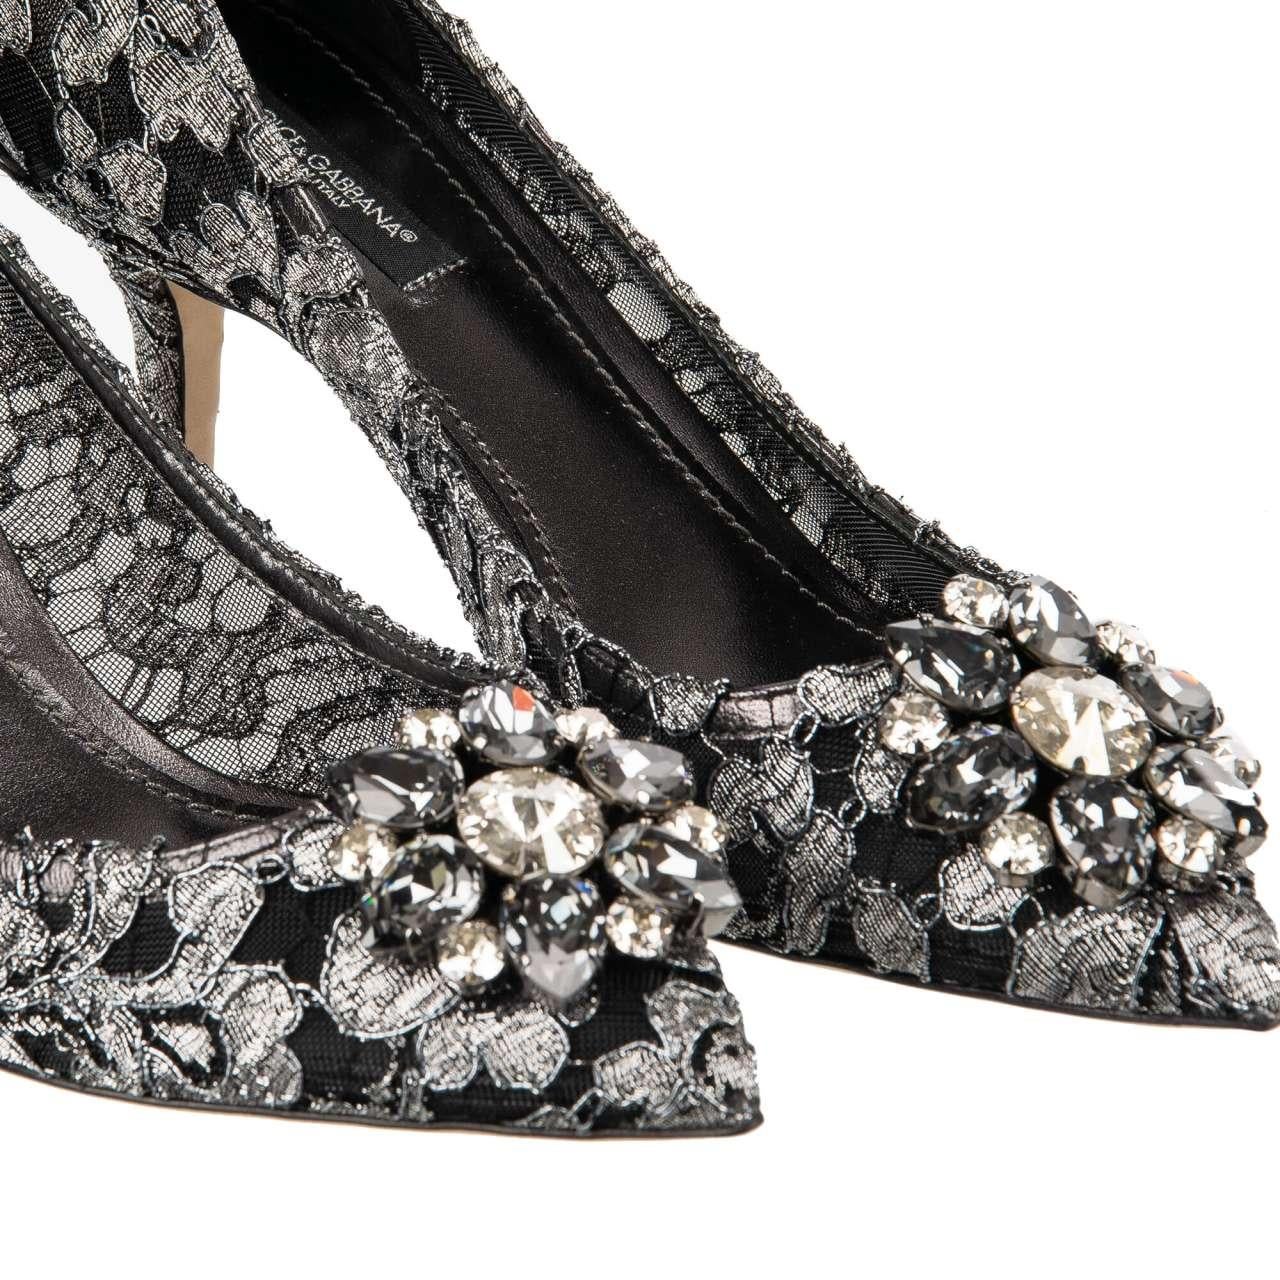 D&G Taormina Lace Pumps BELLUCCI with Crystal Brooch Silver Black EUR 36 In Excellent Condition For Sale In Erkrath, DE